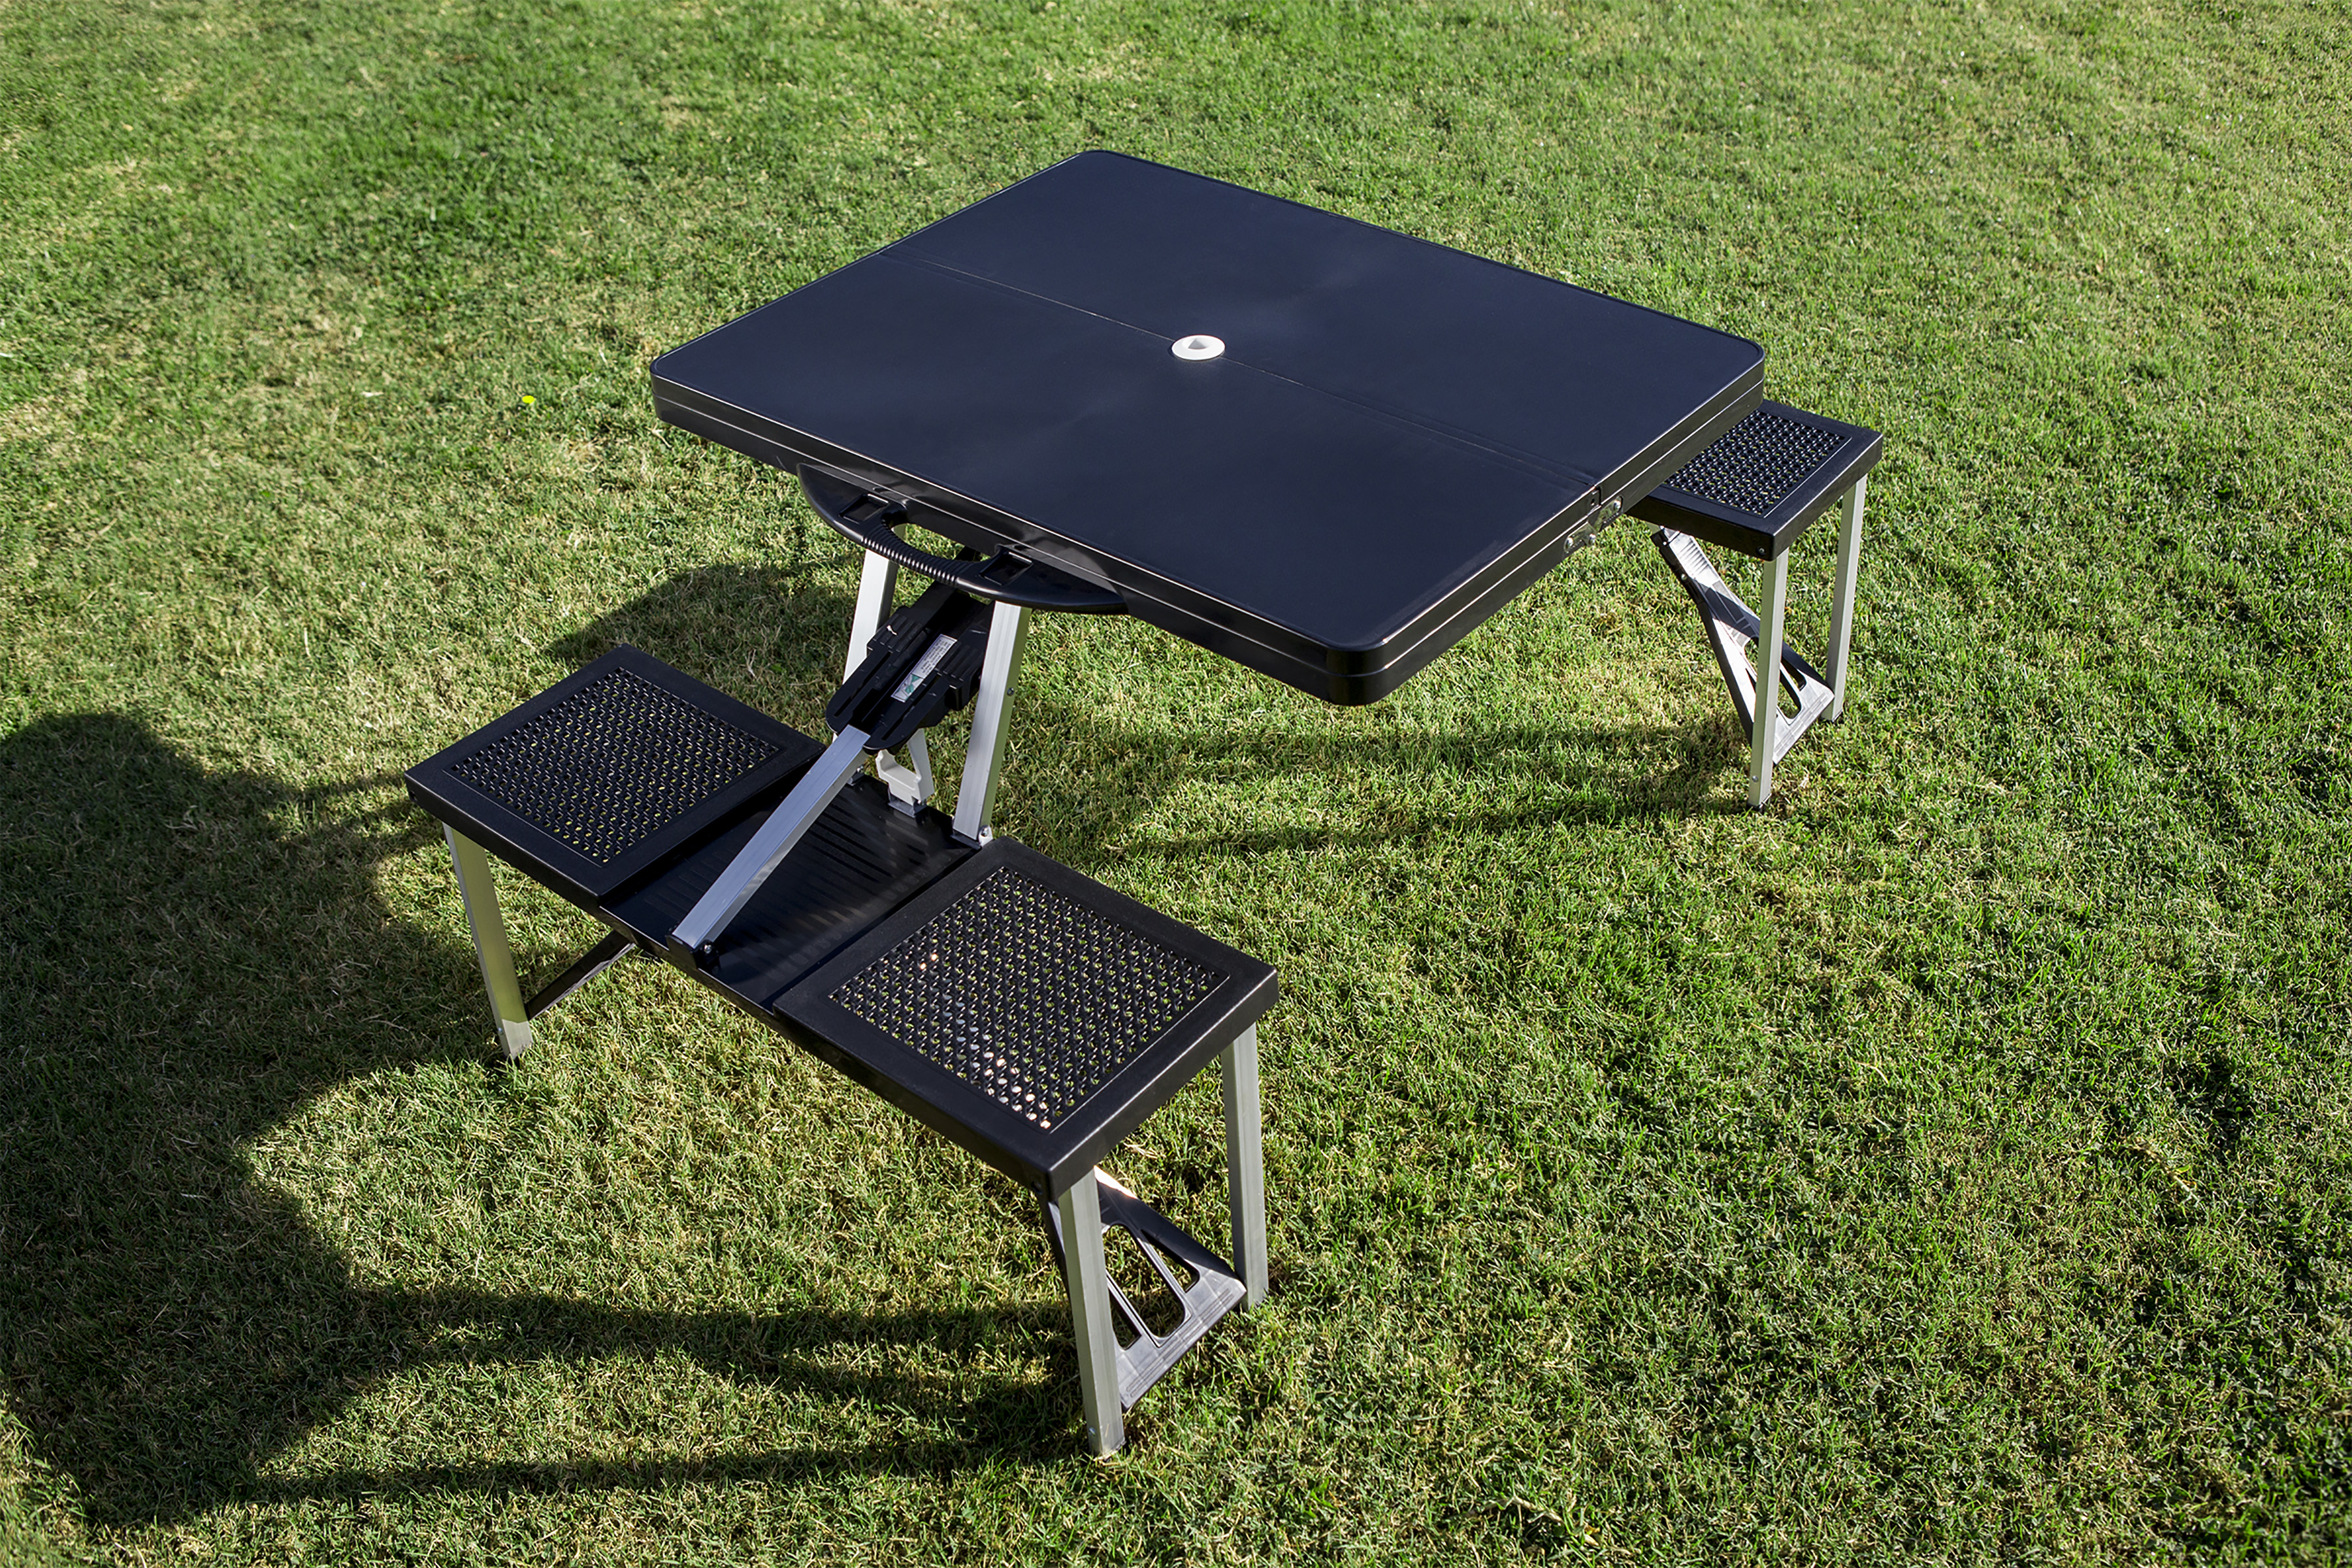 Football Field - Tampa Bay Buccaneers - Picnic Table Portable Folding Table with Seats